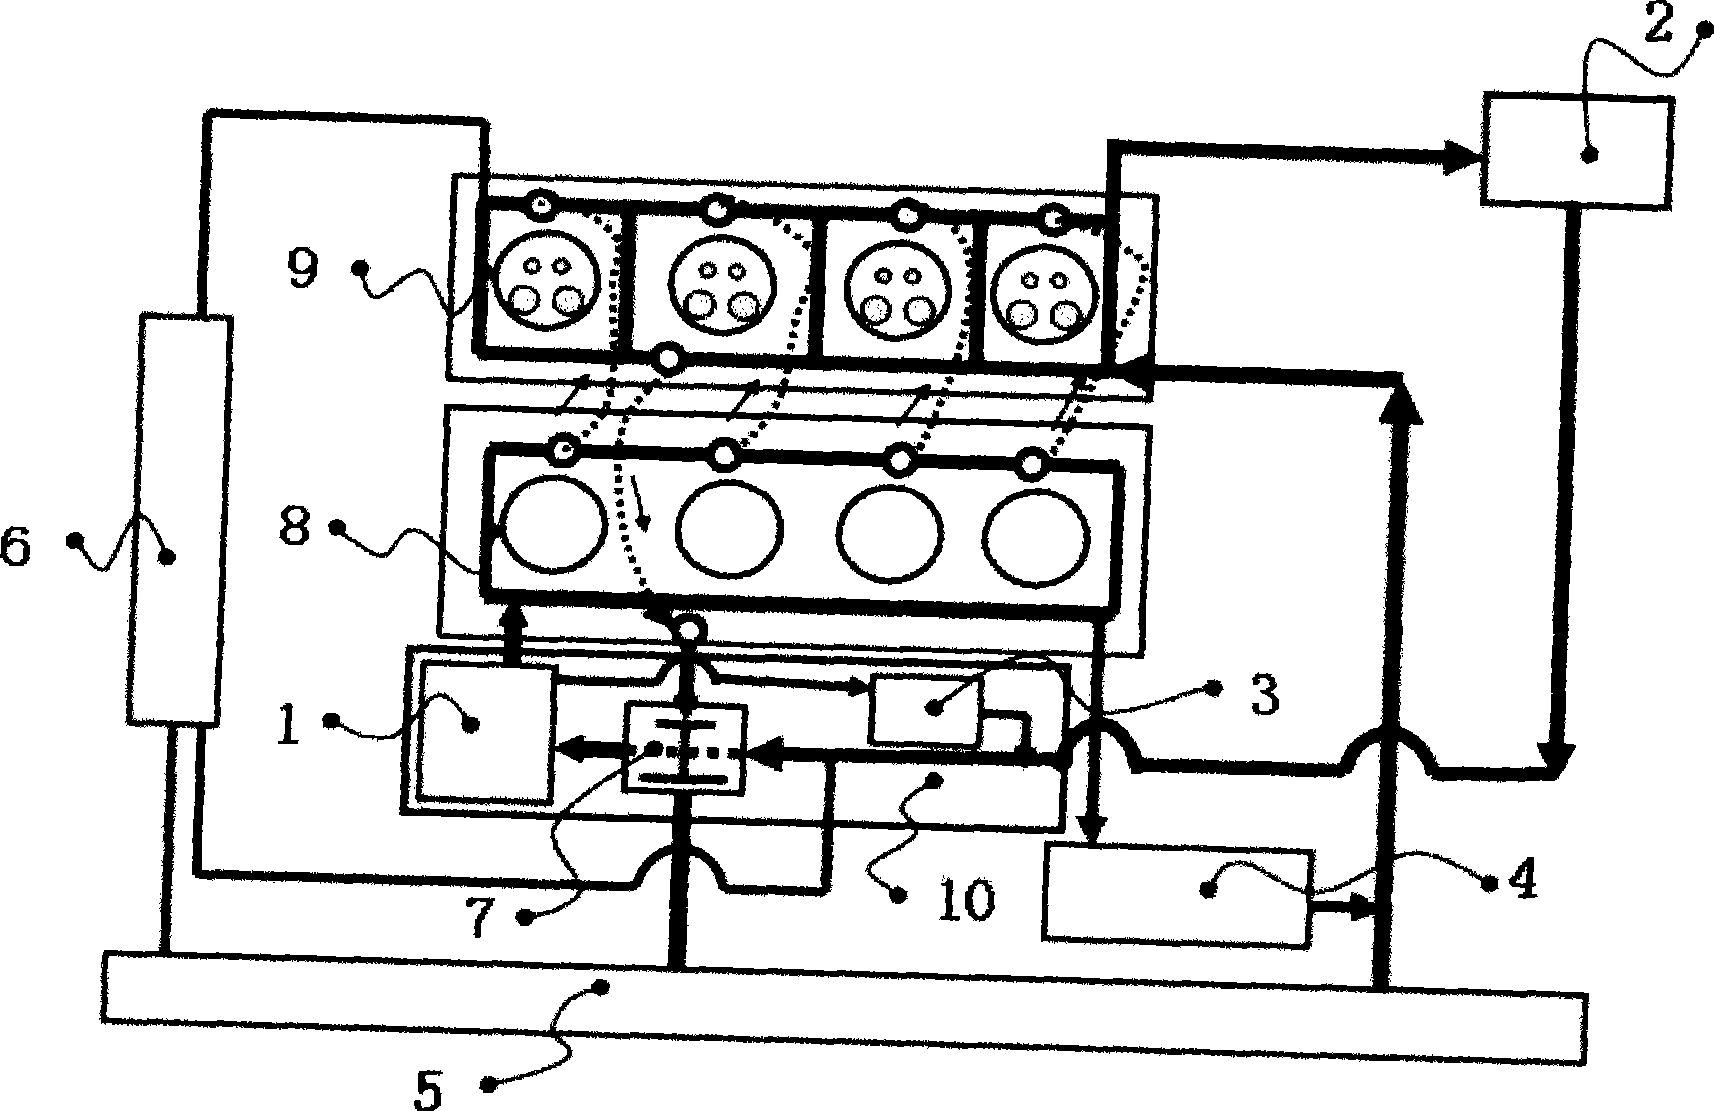 Cooling system of engine